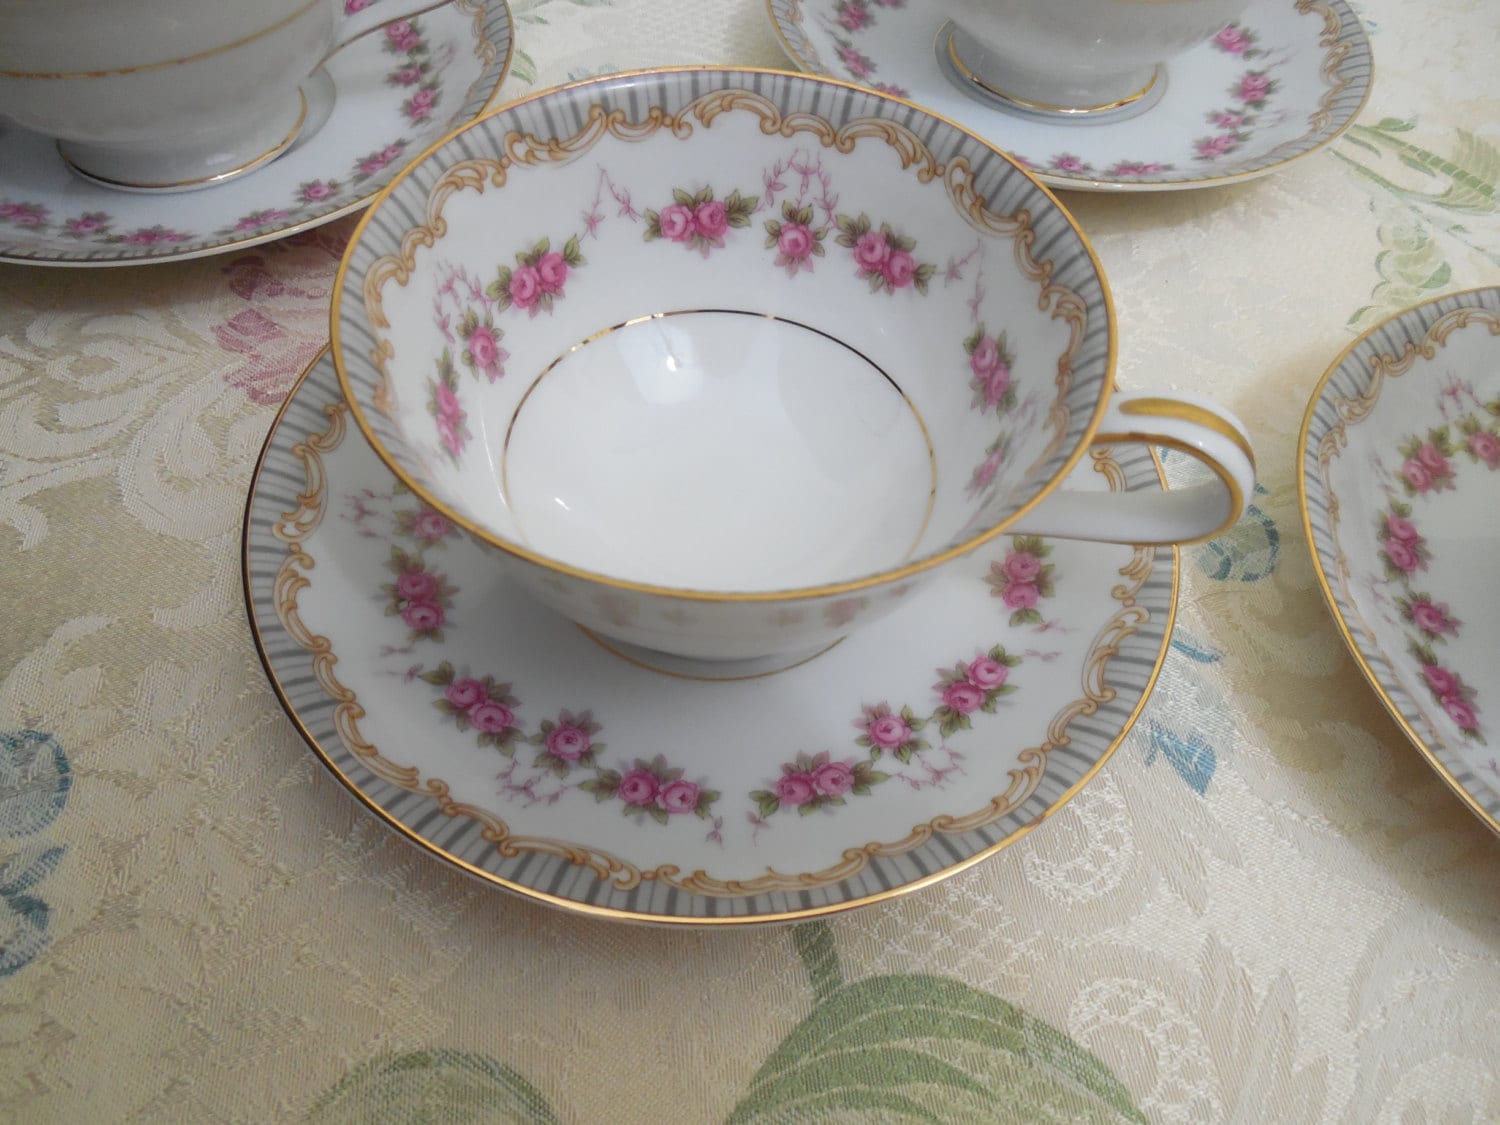 Vintage 1950s Noritake China Ridgewood Footed Cup by EnquireWithin